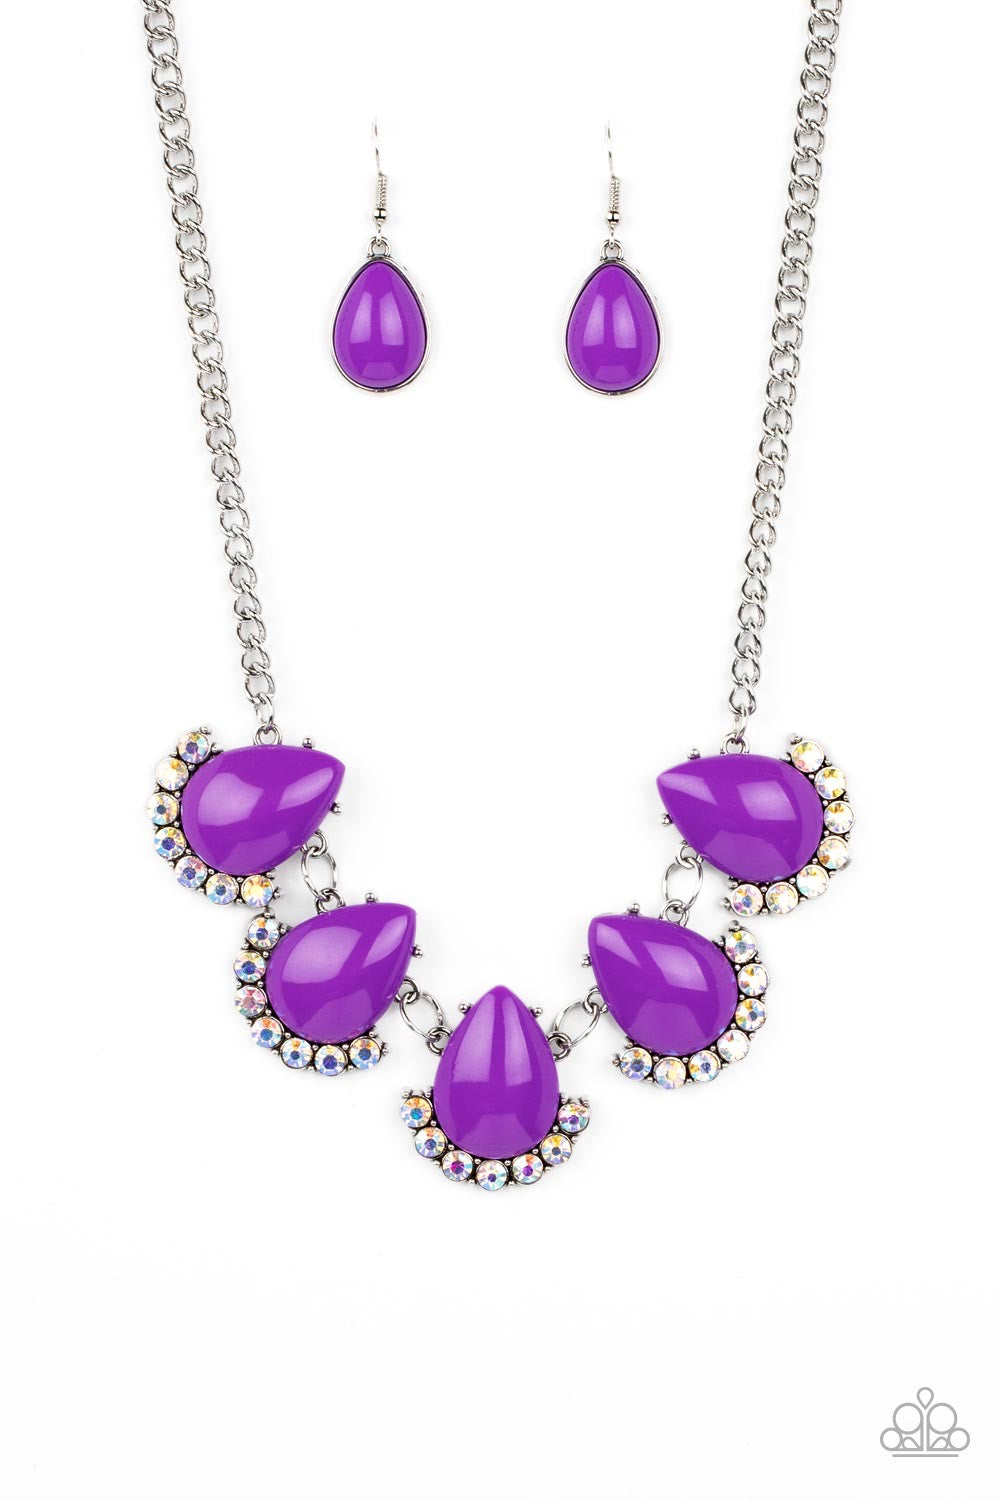 Mesmerizing Art Deco Crystal Flowers Statement Necklace Earrings Brida –  Rosemarie Collections